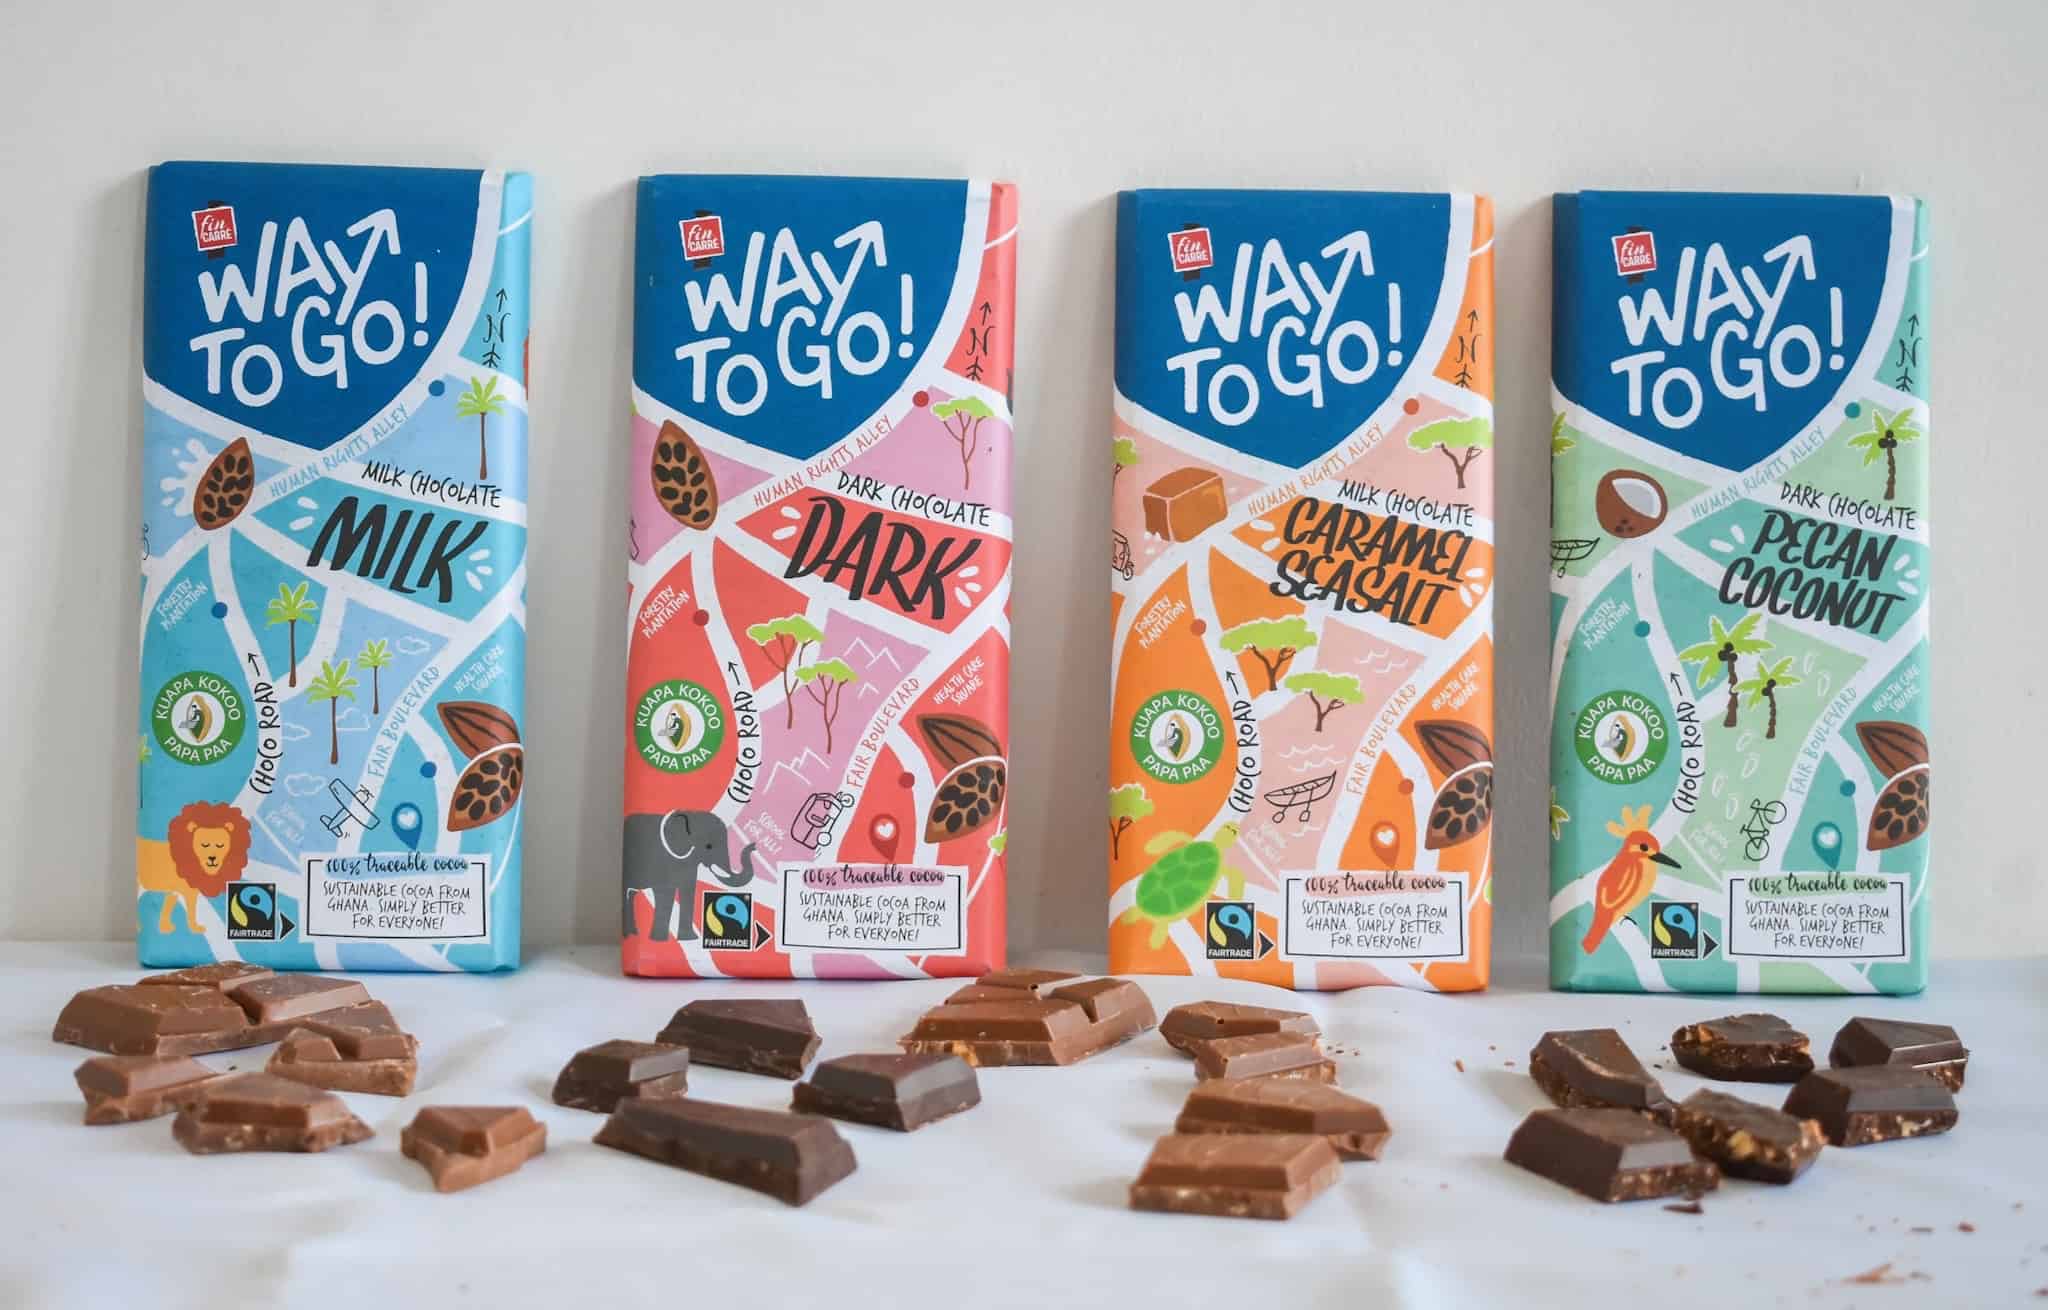 Review: Lidl Way To Go Chocolade